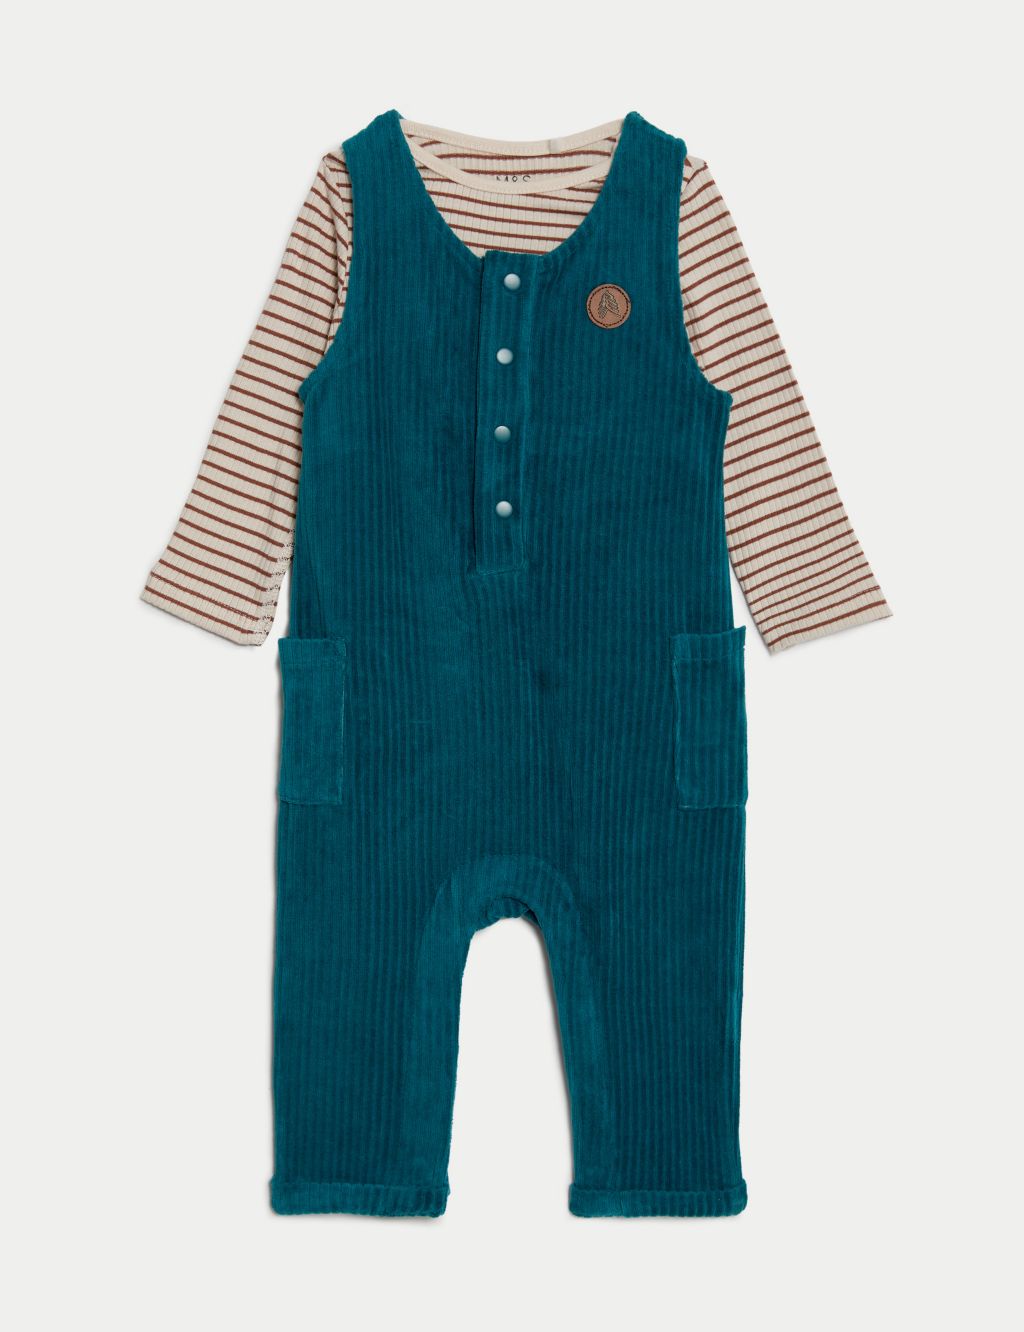 2pc Cotton Rich Striped Outfit (0-3 Yrs) image 1